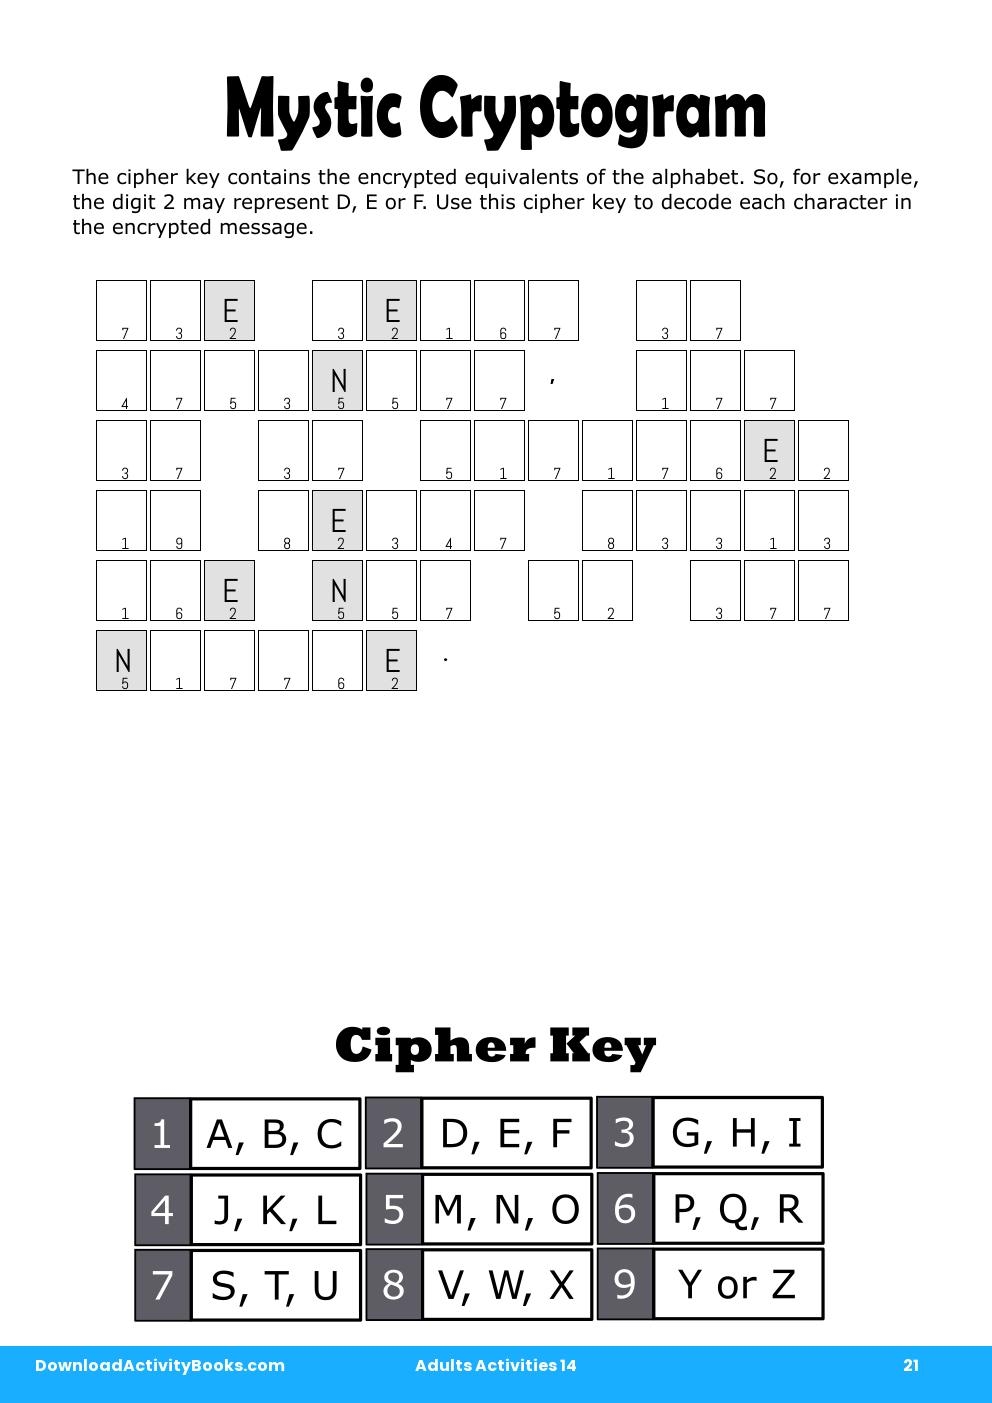 Mystic Cryptogram in Adults Activities 14